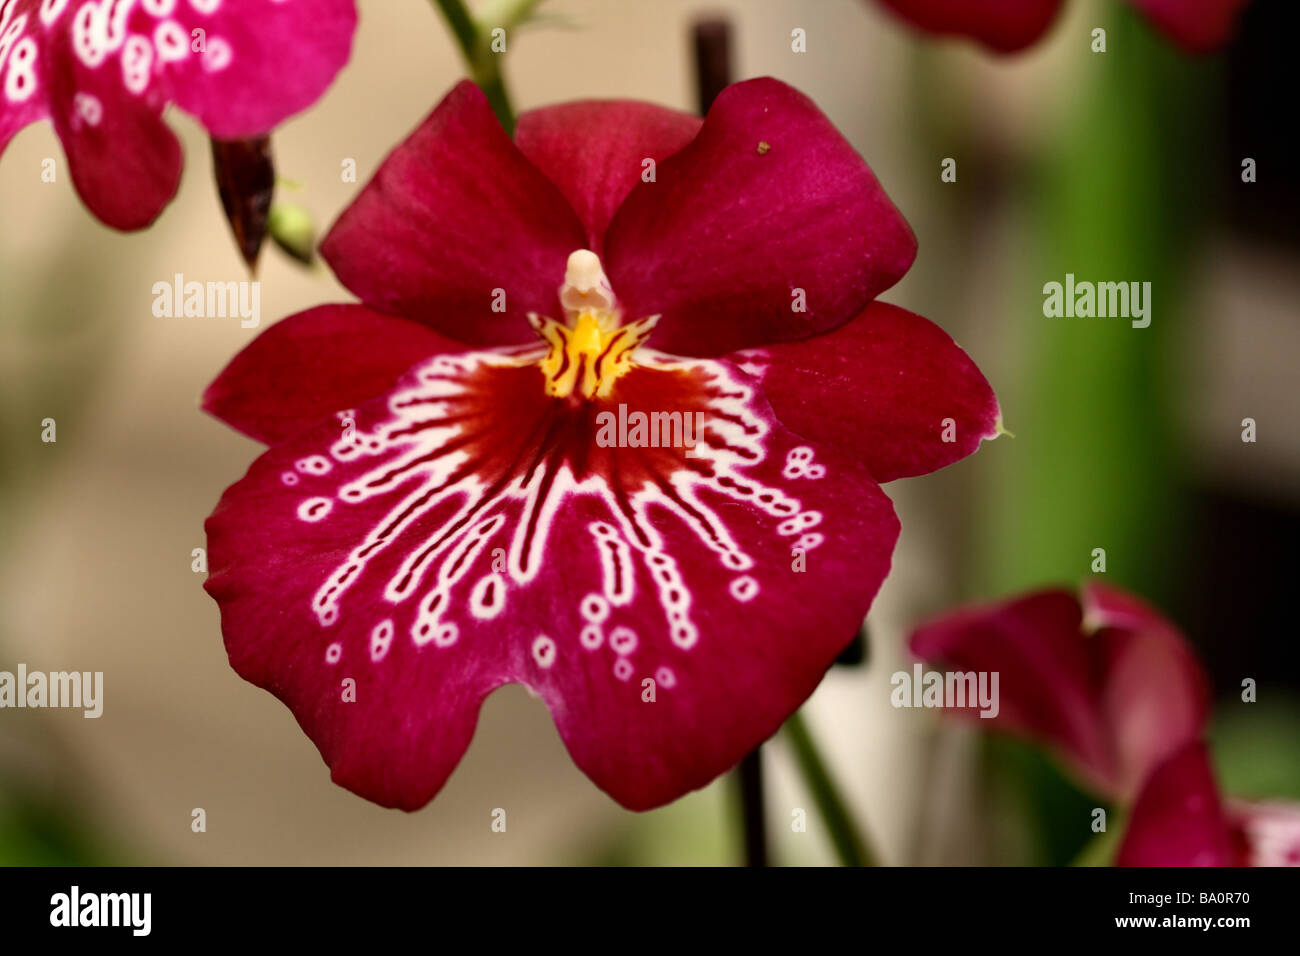 A Pansy Orchid, miltonia, red flower bloom in close up or macro showing flower detail and structure Stock Photo